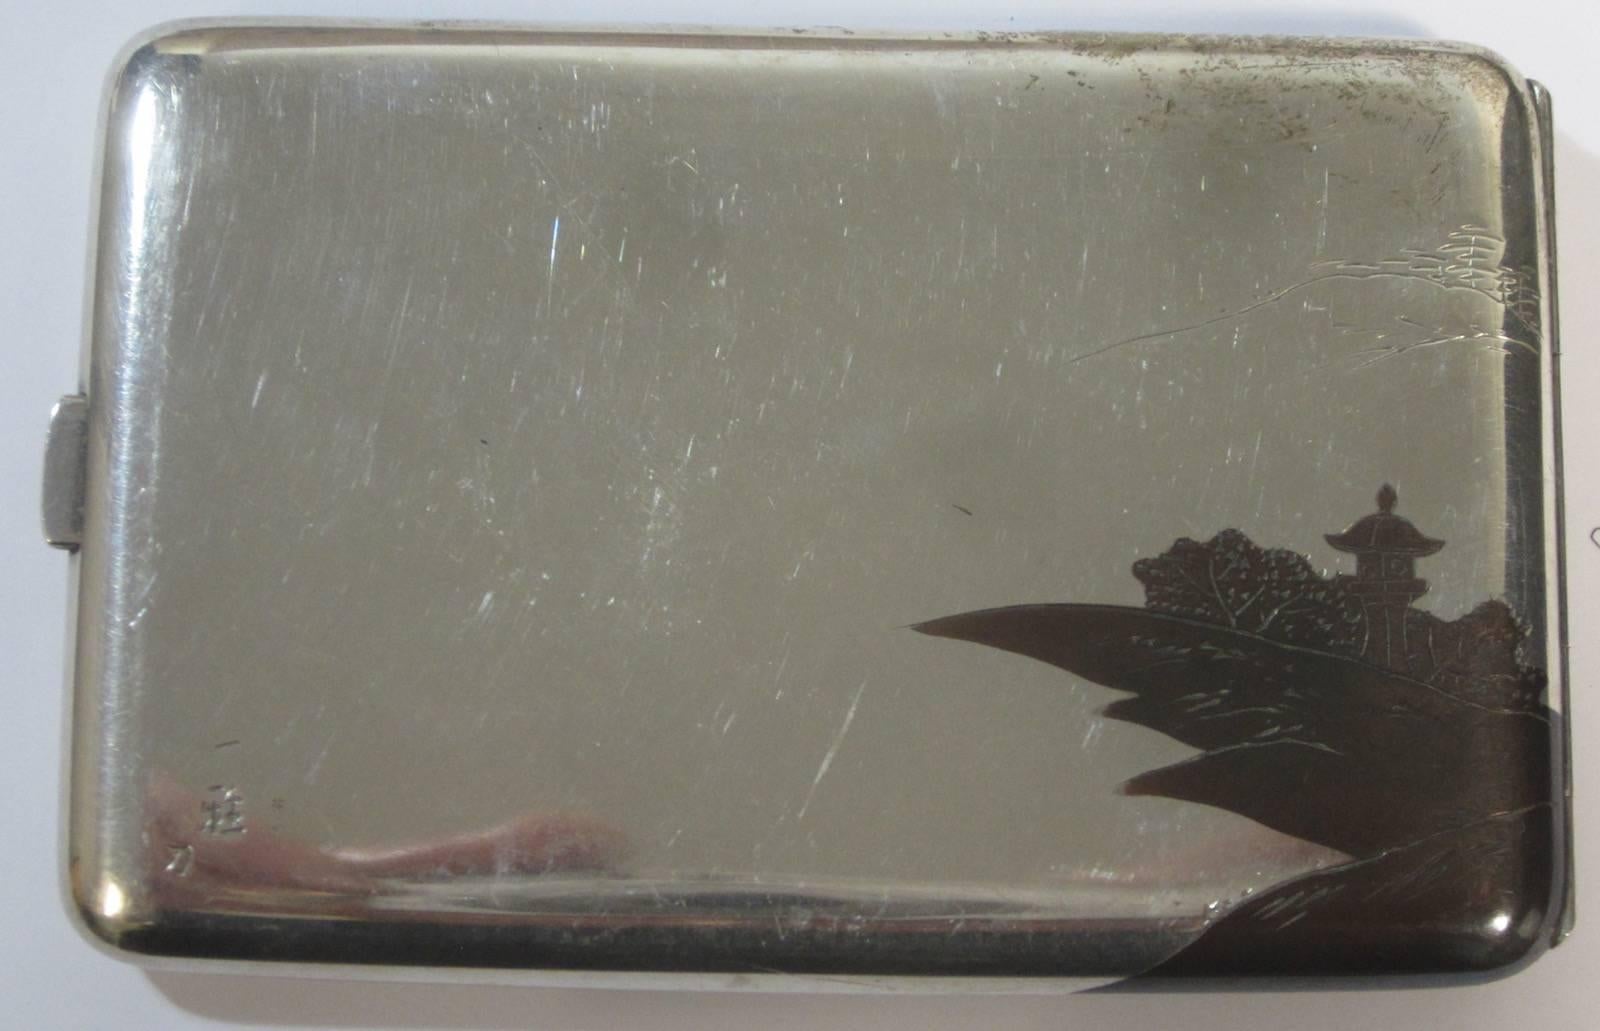 Japanese silver cigarette case,
with internal decoration,
marked SILVER 950,
144 grams, 5.1 ounces.